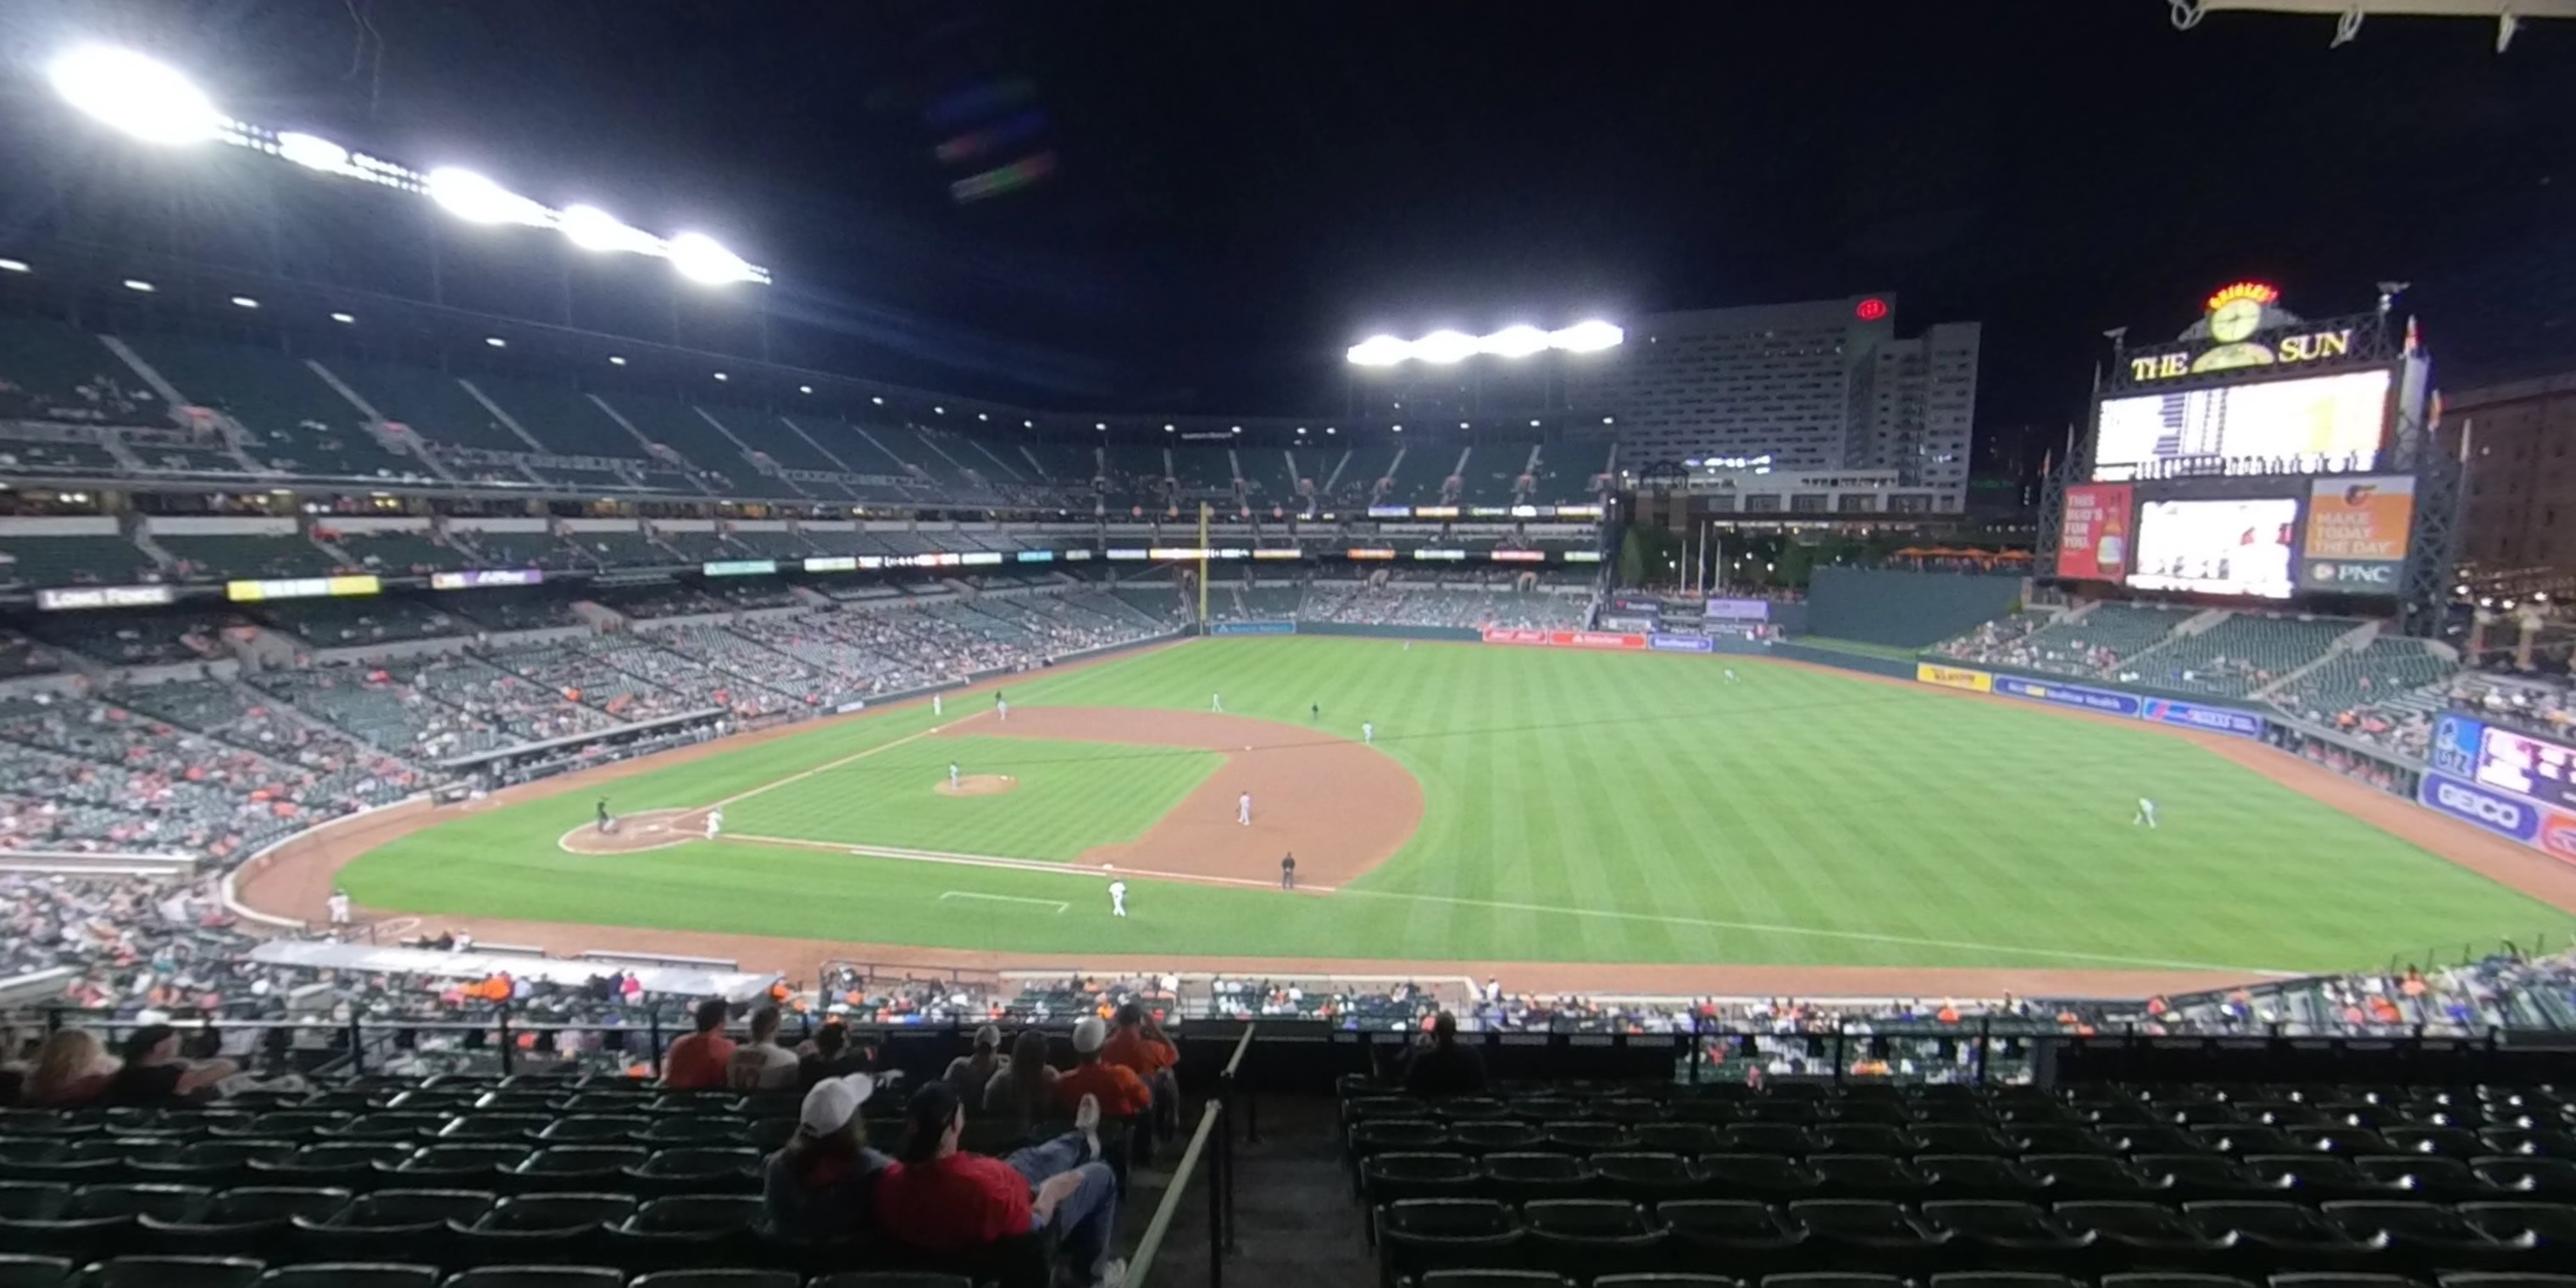 Section 218 At Oriole Park